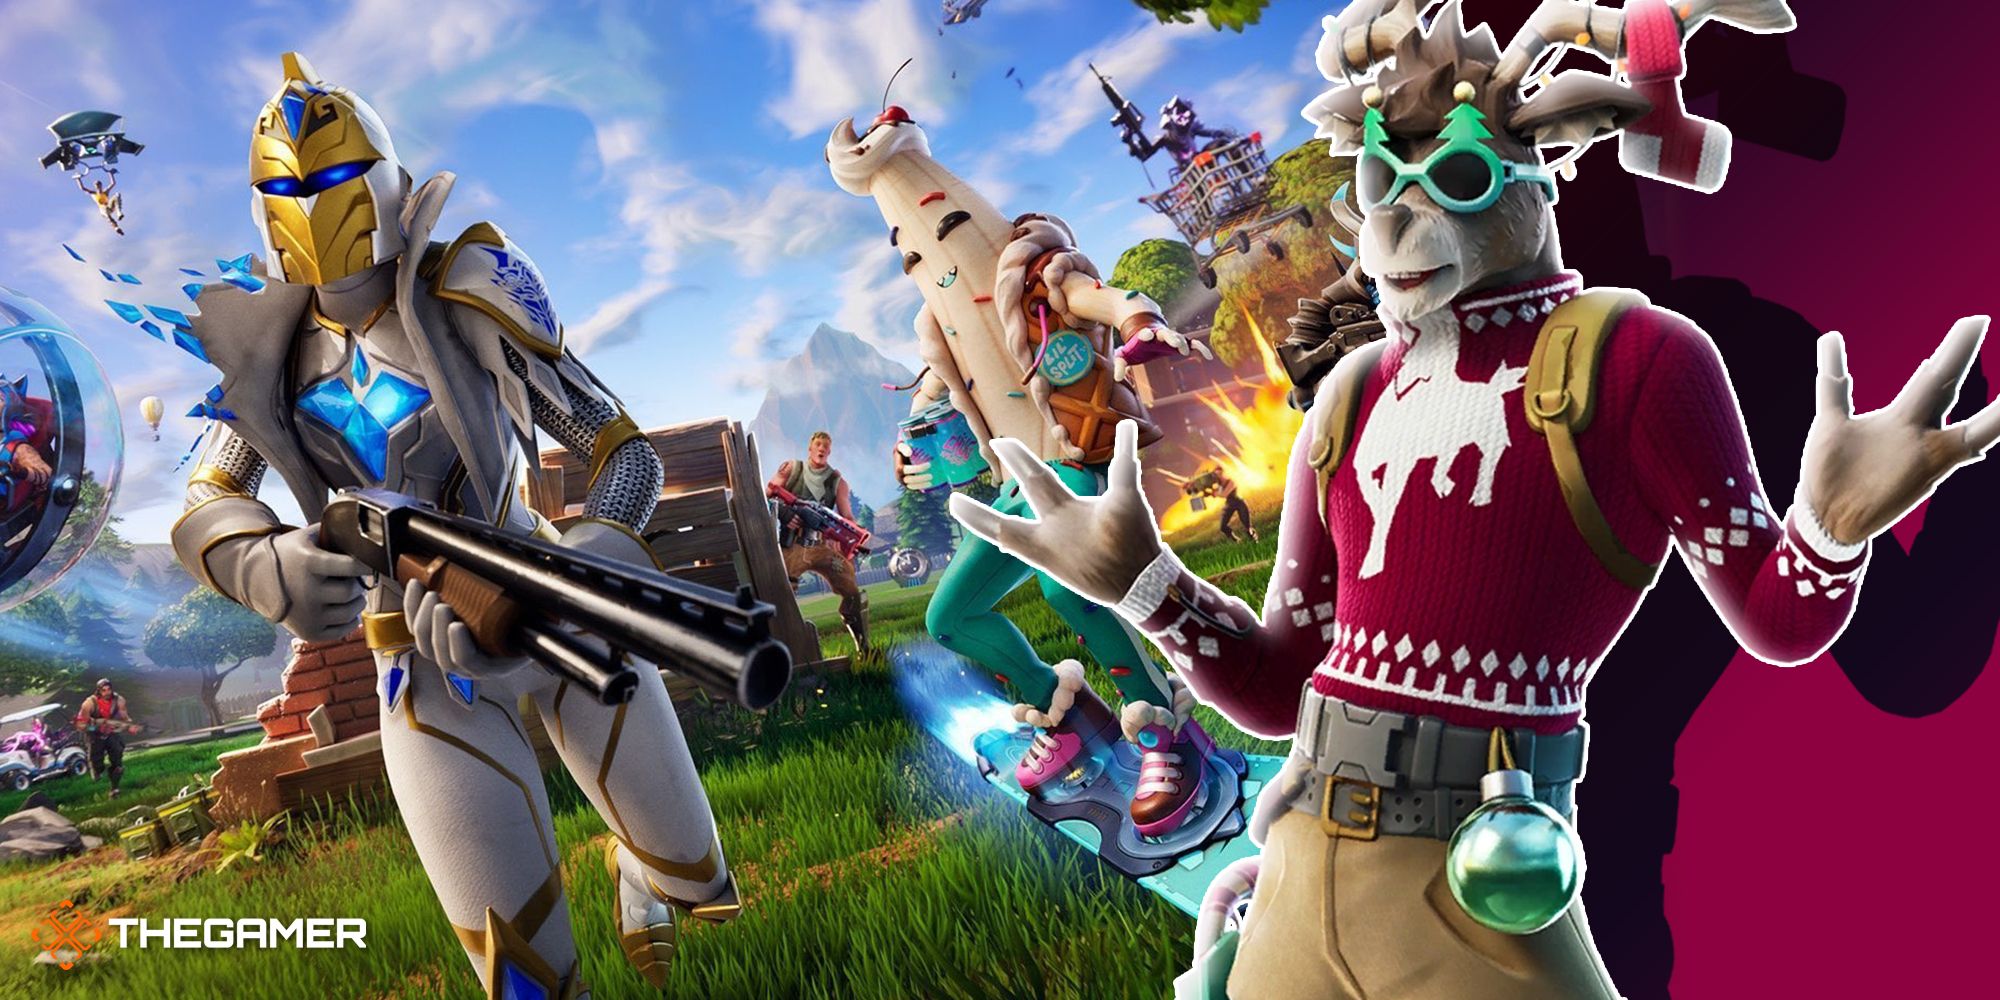 fortnite characters from the latest season and a reindeer from the game smiling and shrugging